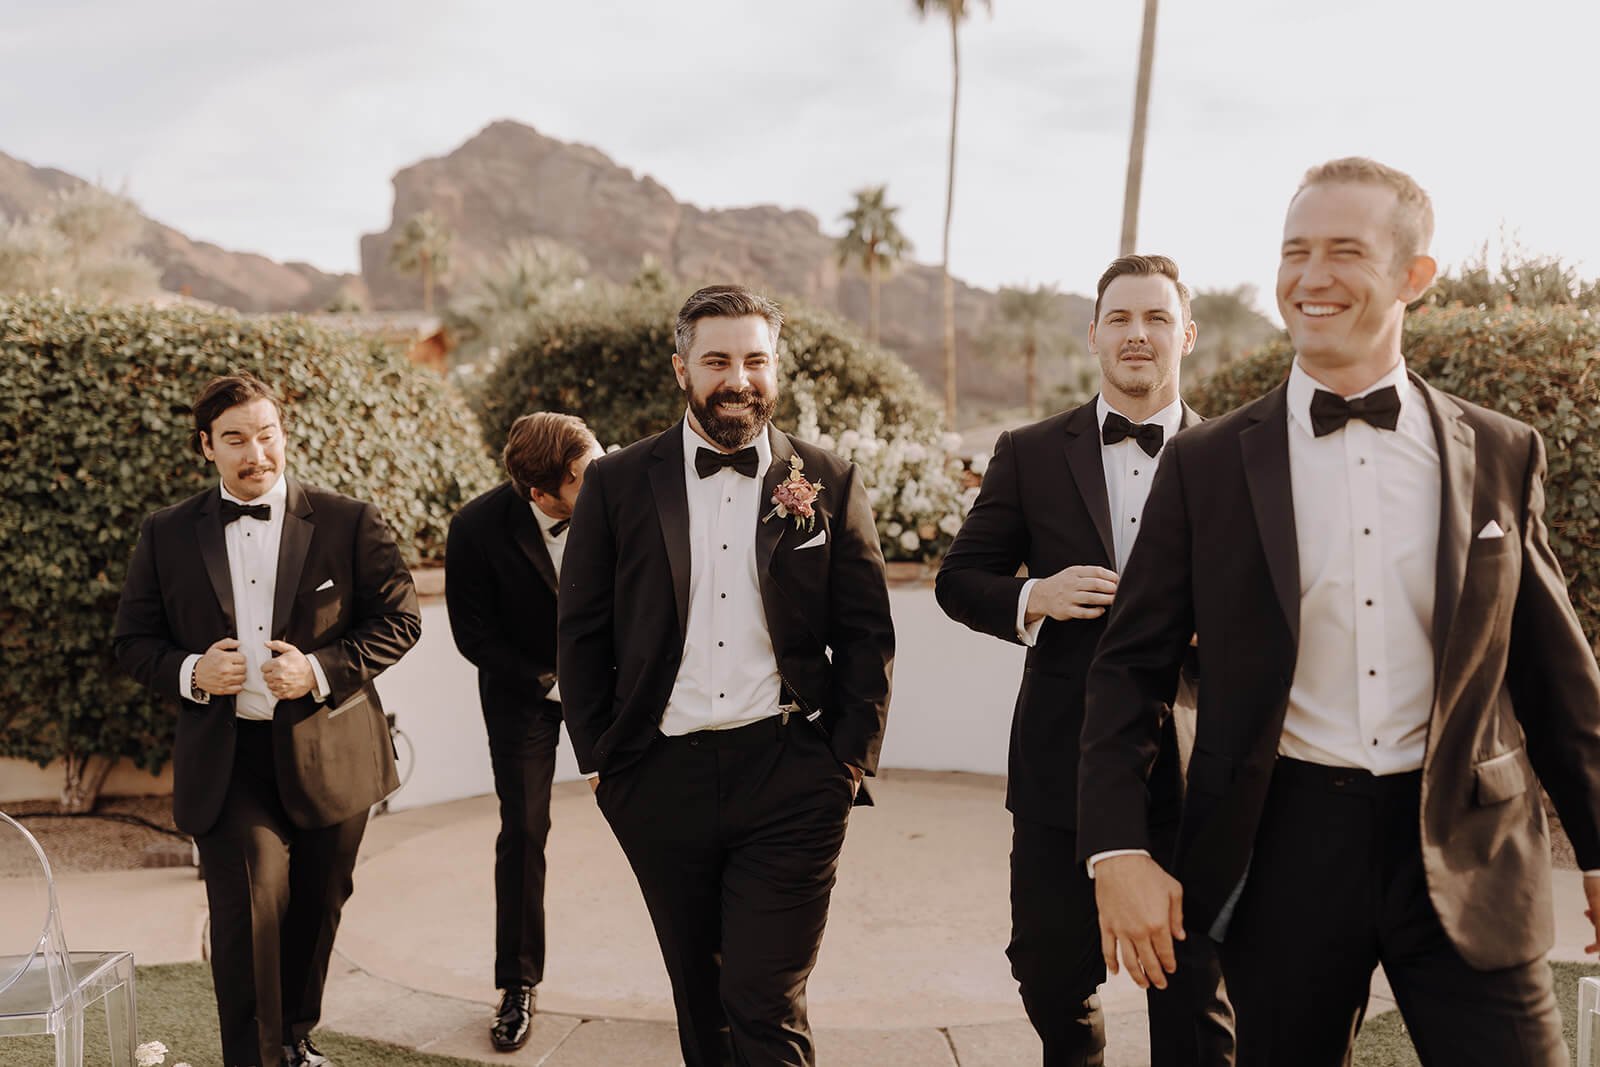 Groom and groomsmen in black tuxedos outside with mountains in background